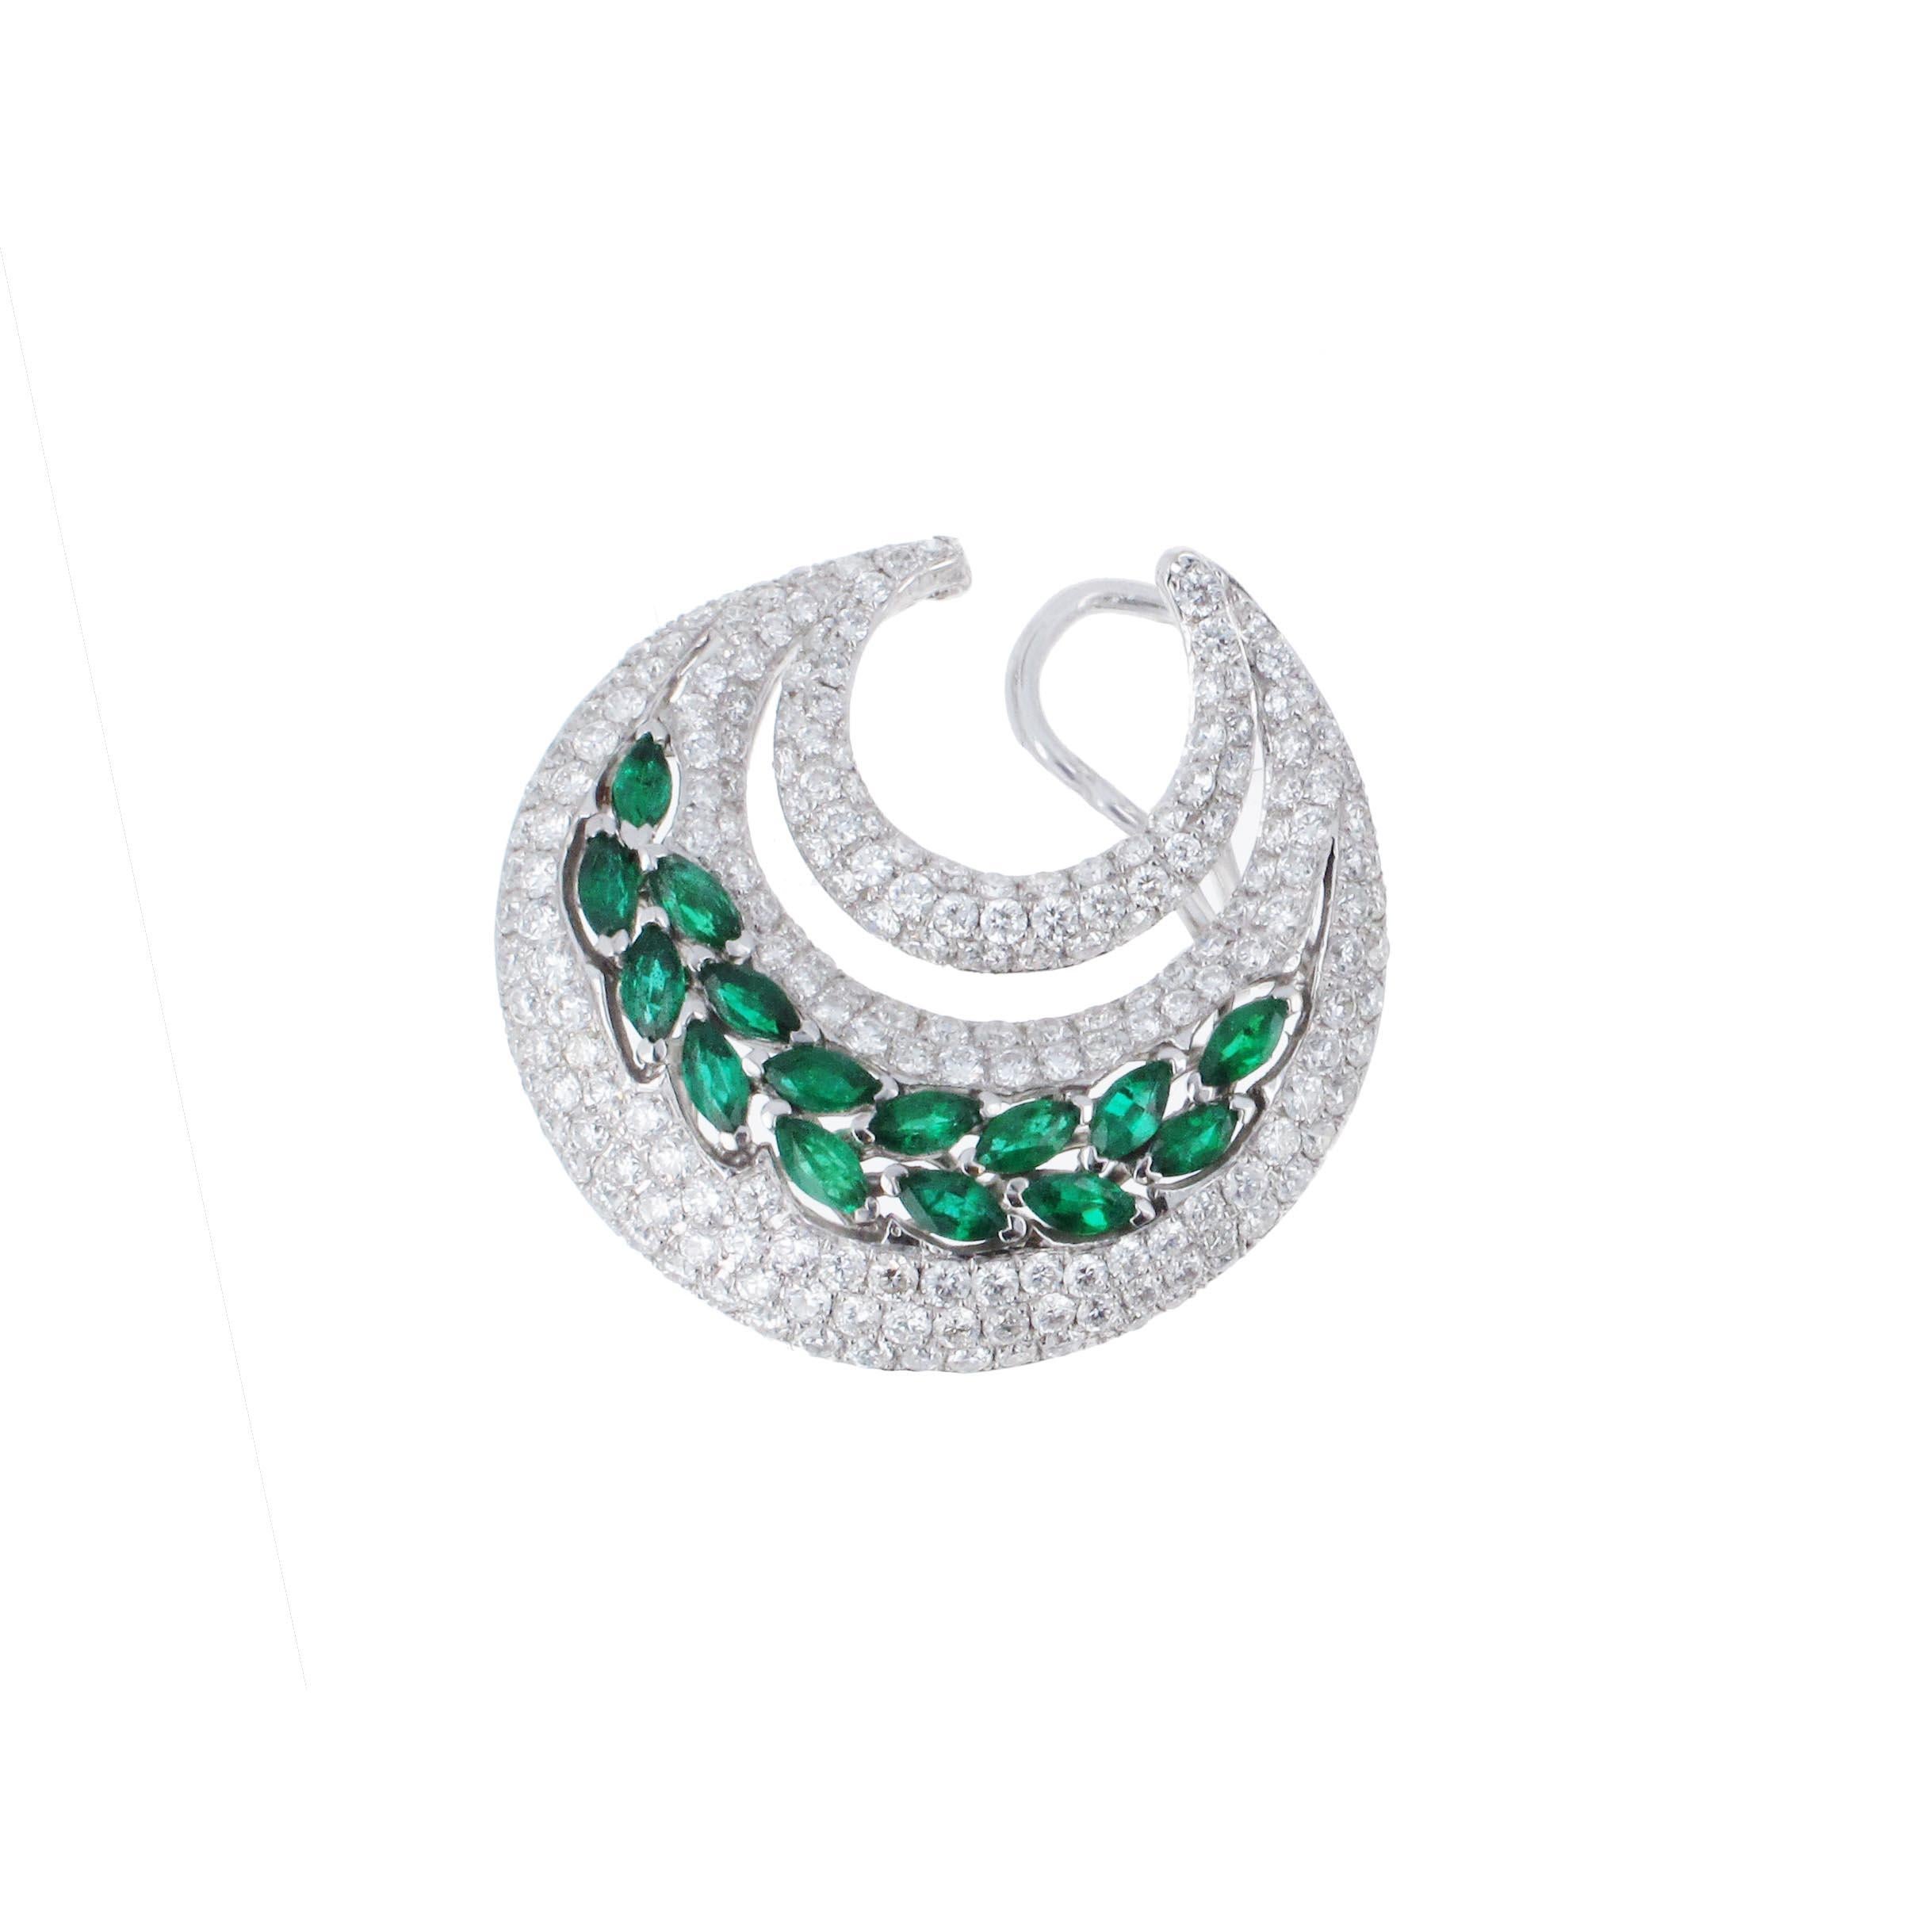 C shape circle stud hoop earrings beautifully made with emerald and diamonds. These stylish earrings have 30 mixed shape emeralds weighing 1.93 carats total and 4.81 carats of round brilliant G/H color VS/SI clarity diamonds. The earrings are made